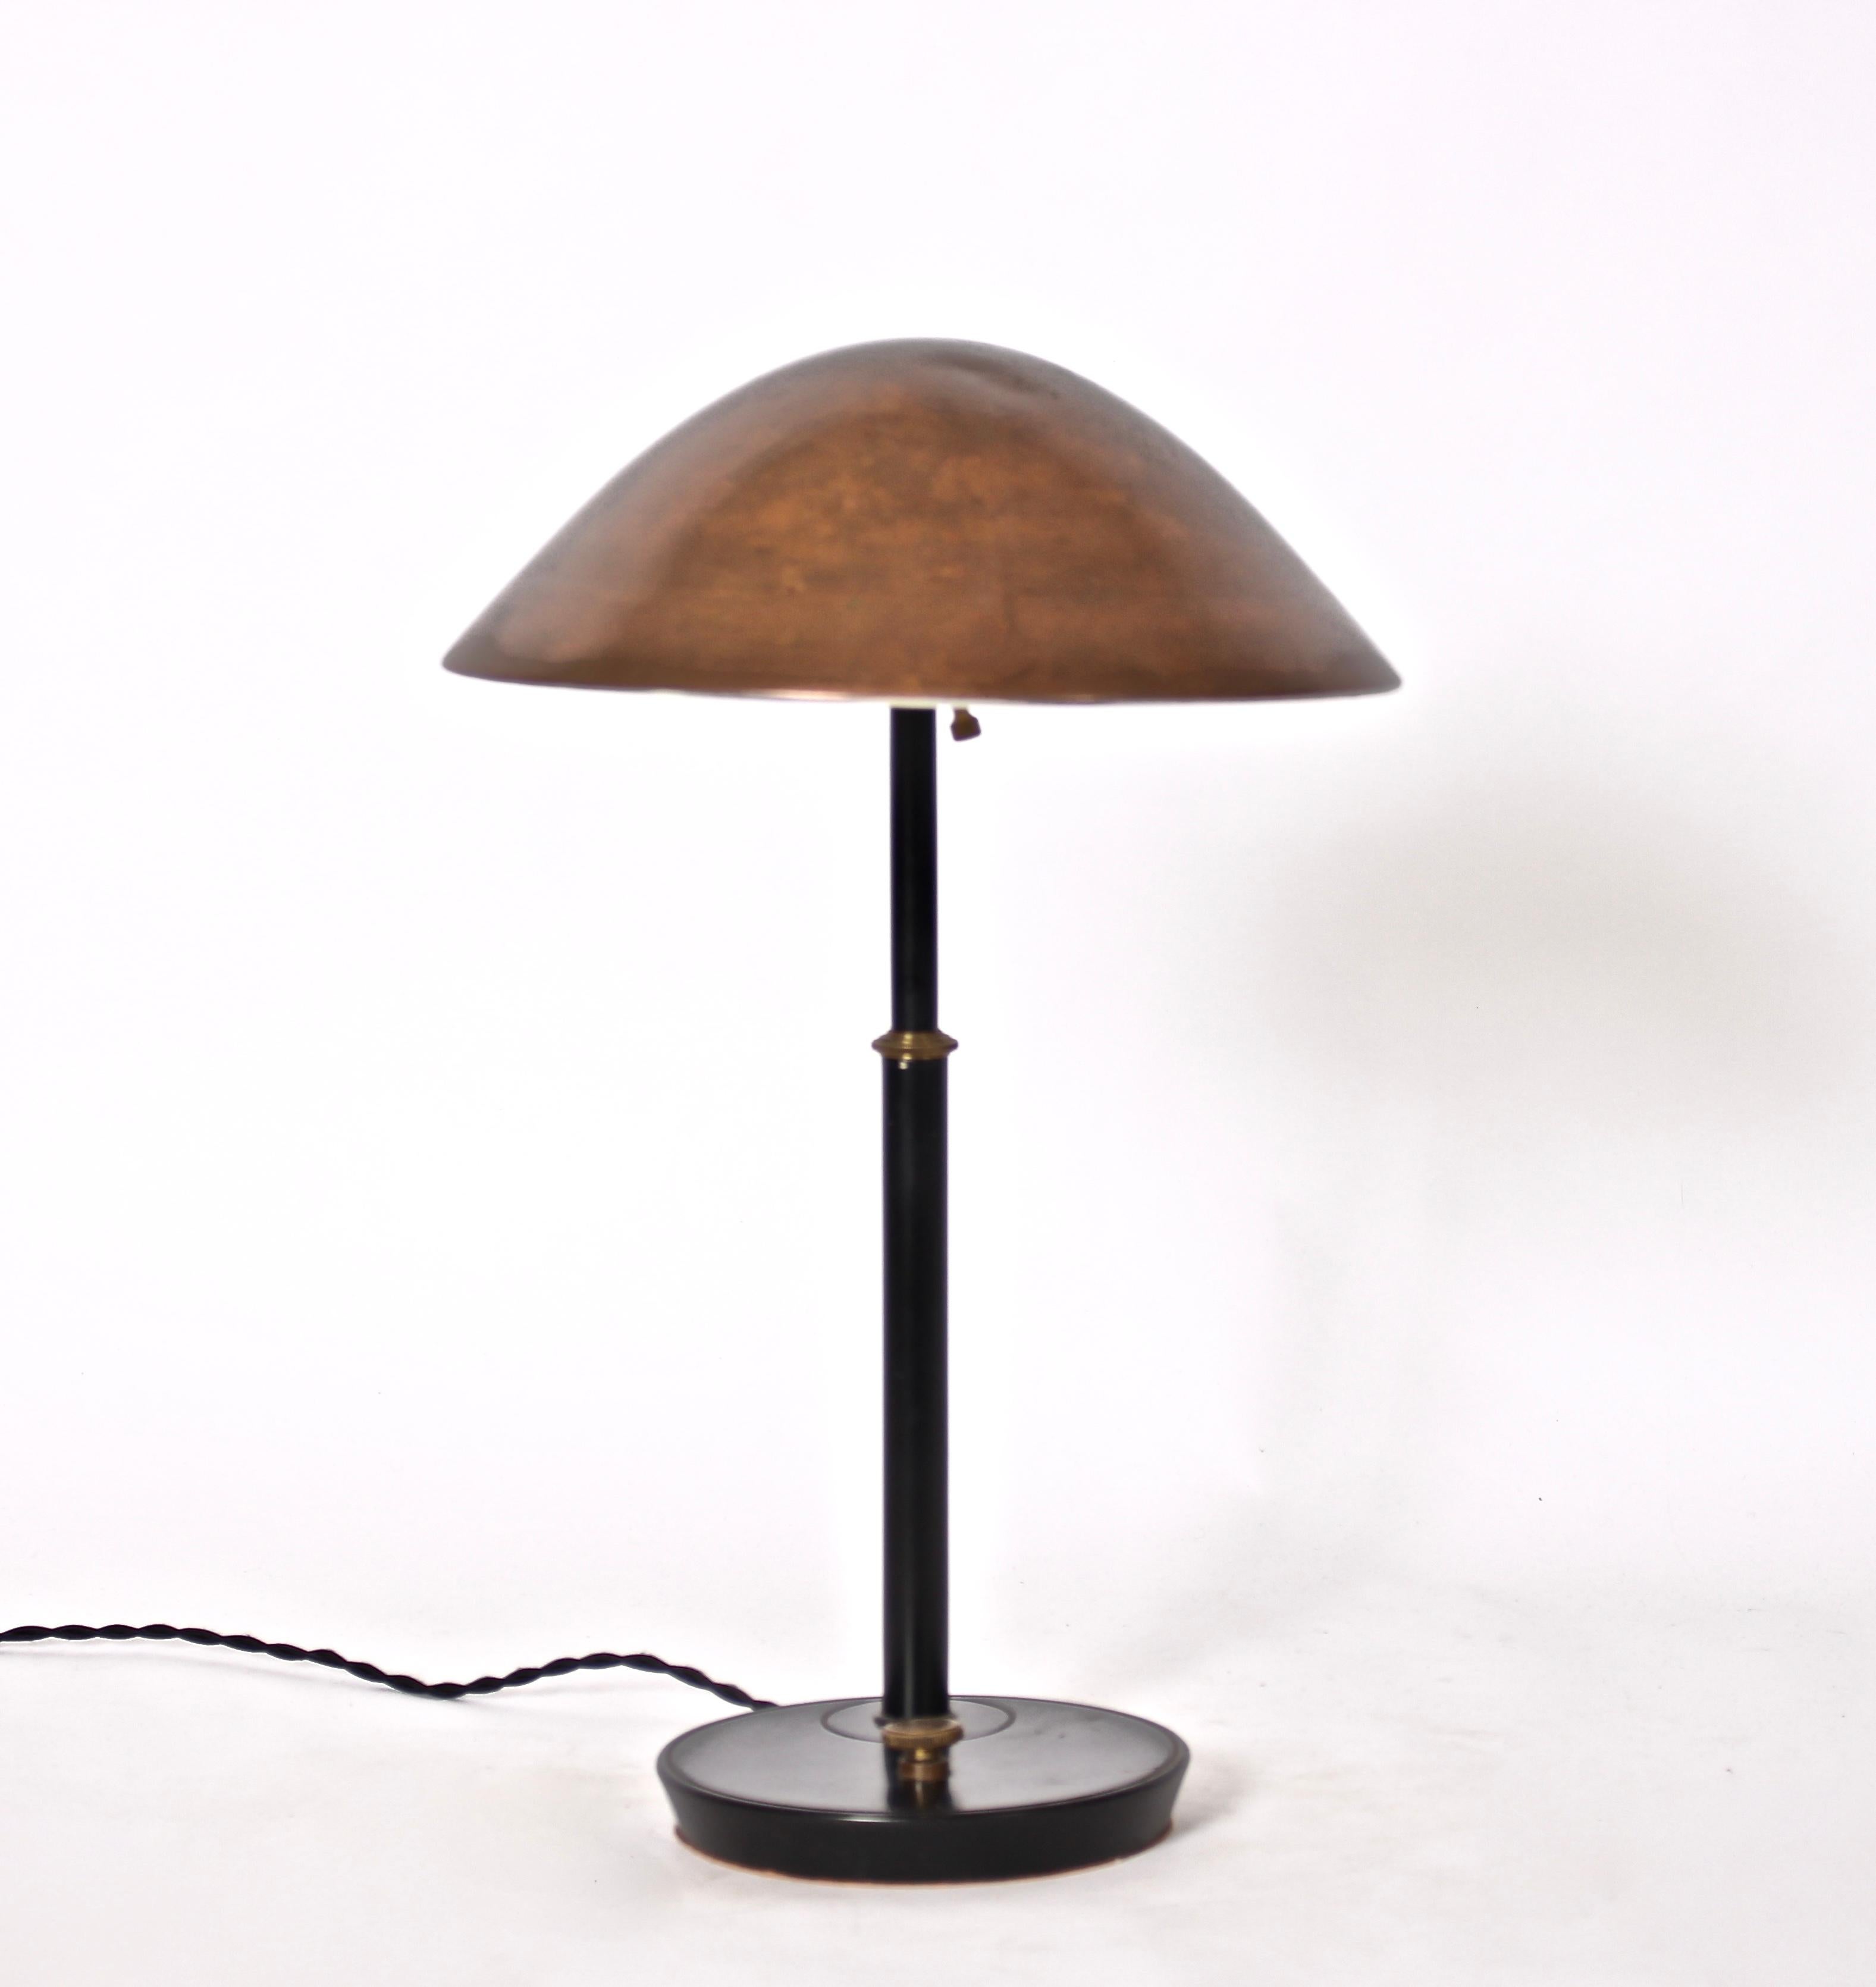 American mid century black enamel reading lamp with brass details and copper shade. Featuring a brass detailed black stem, round patinated copper saucer shade with off-white interior on round 7D weighted base. With hood and base switch. 